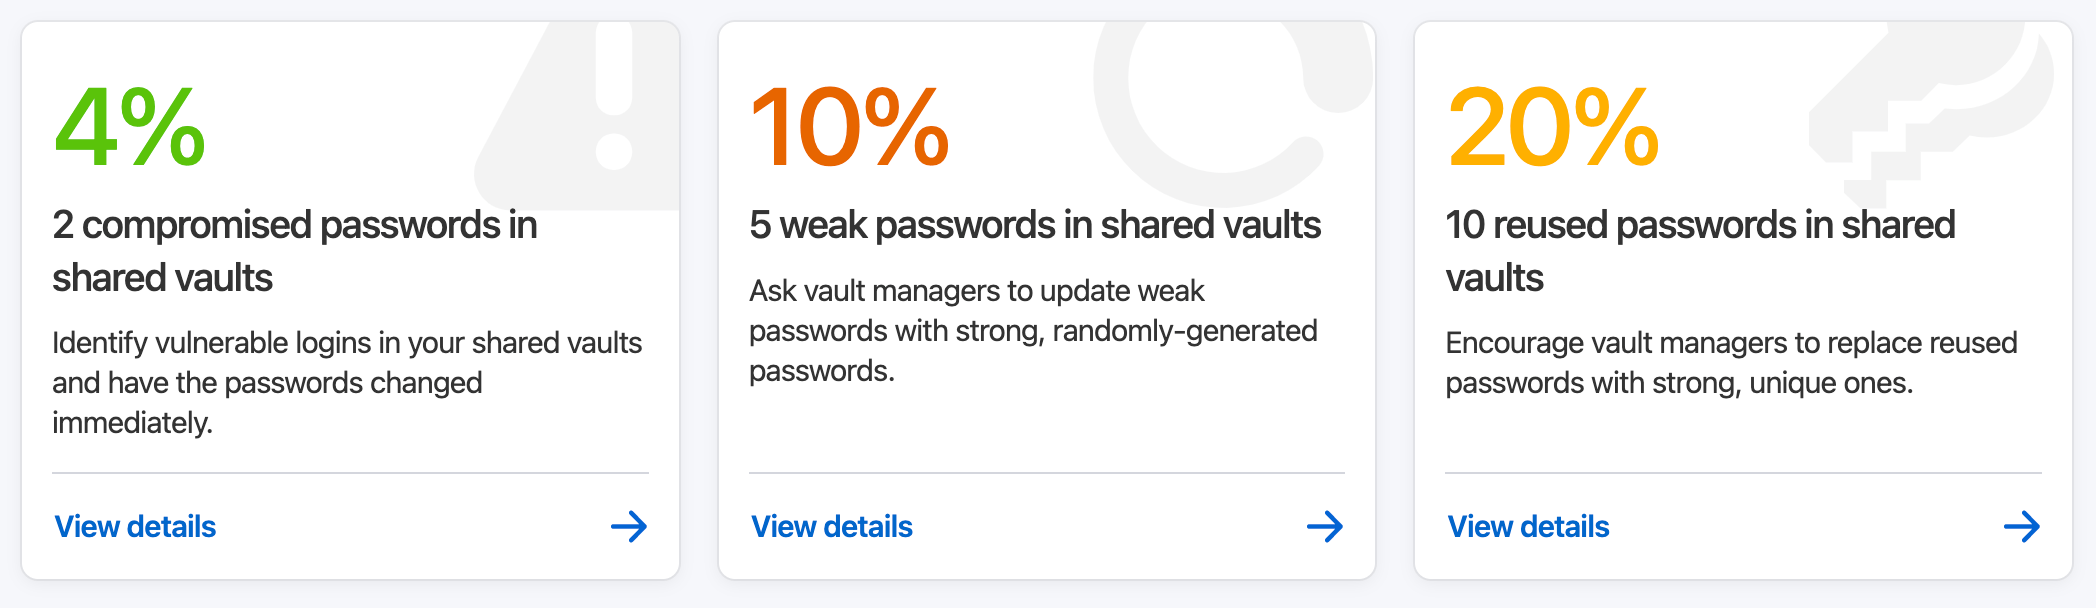 The password health section of the Insights page on 1password.com.